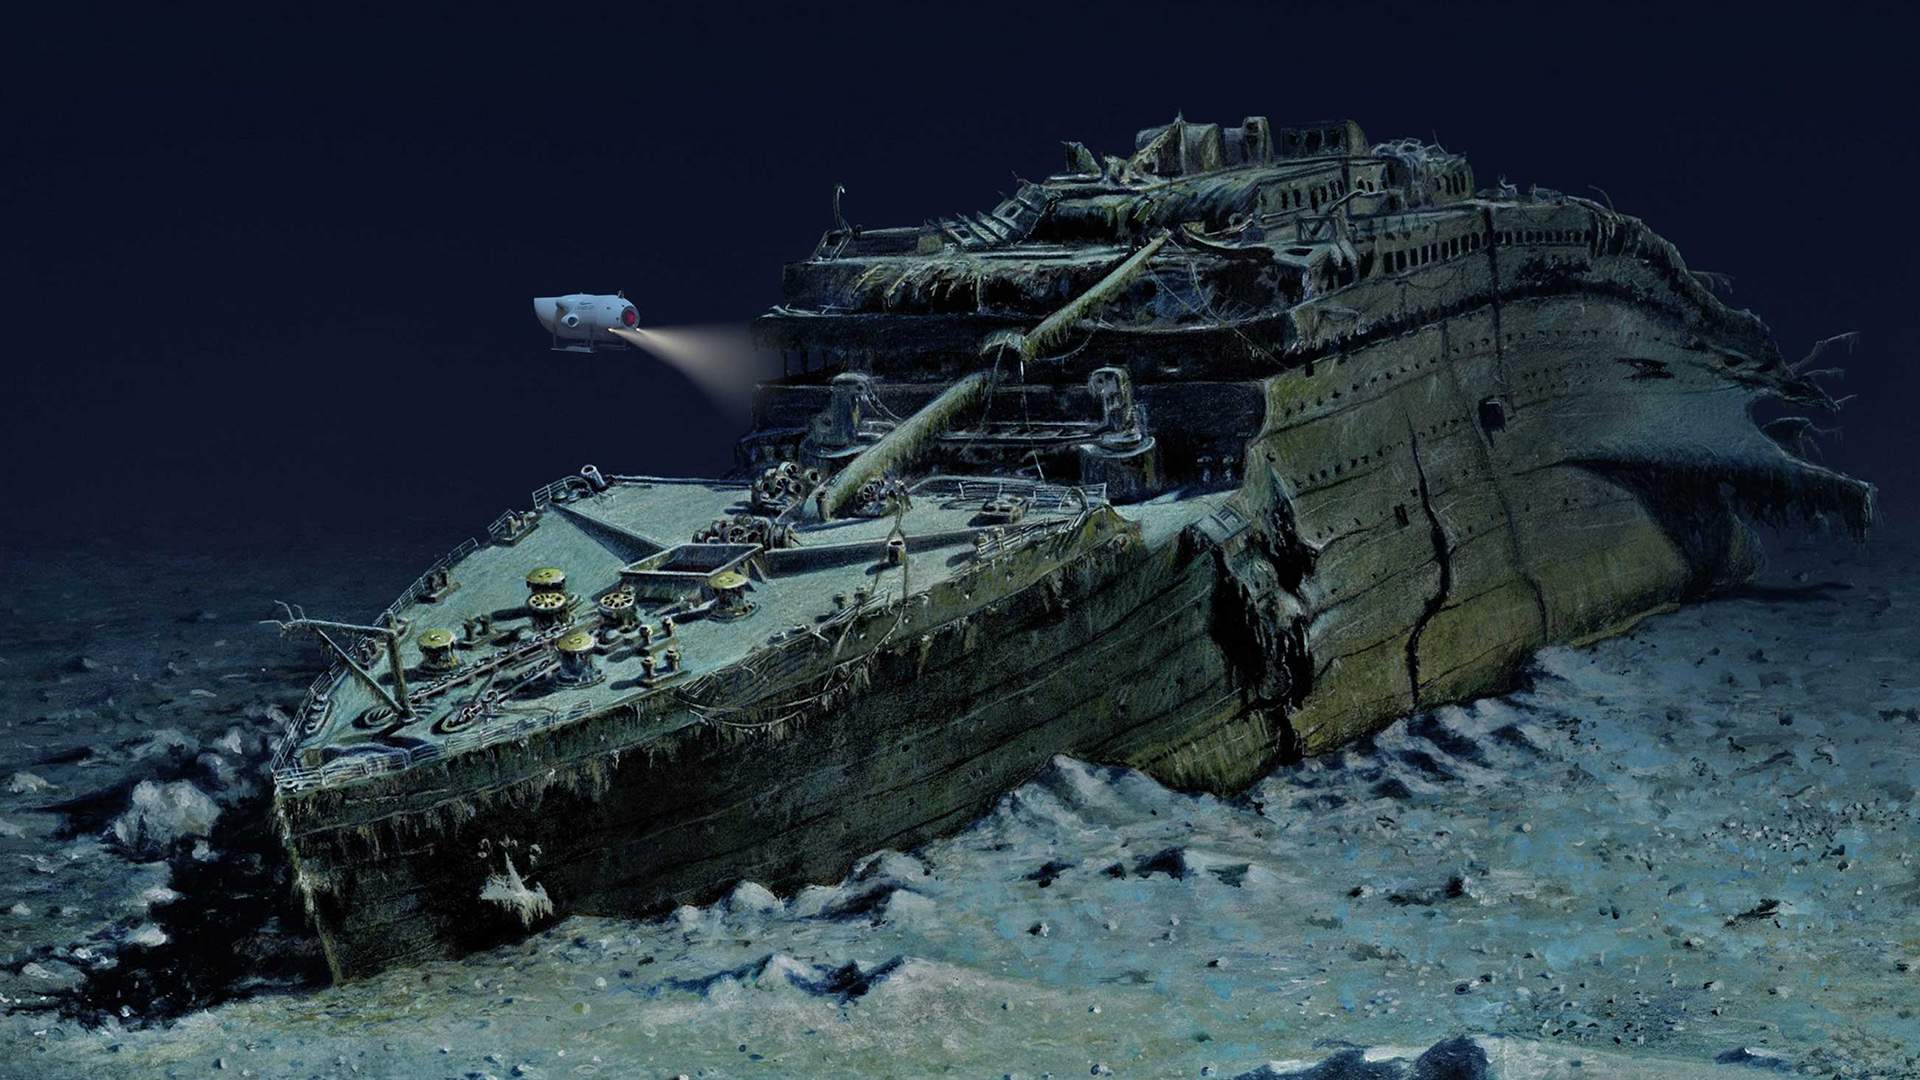 You Can Now Take Underwater Tours of the Titanic - Concrete Playground